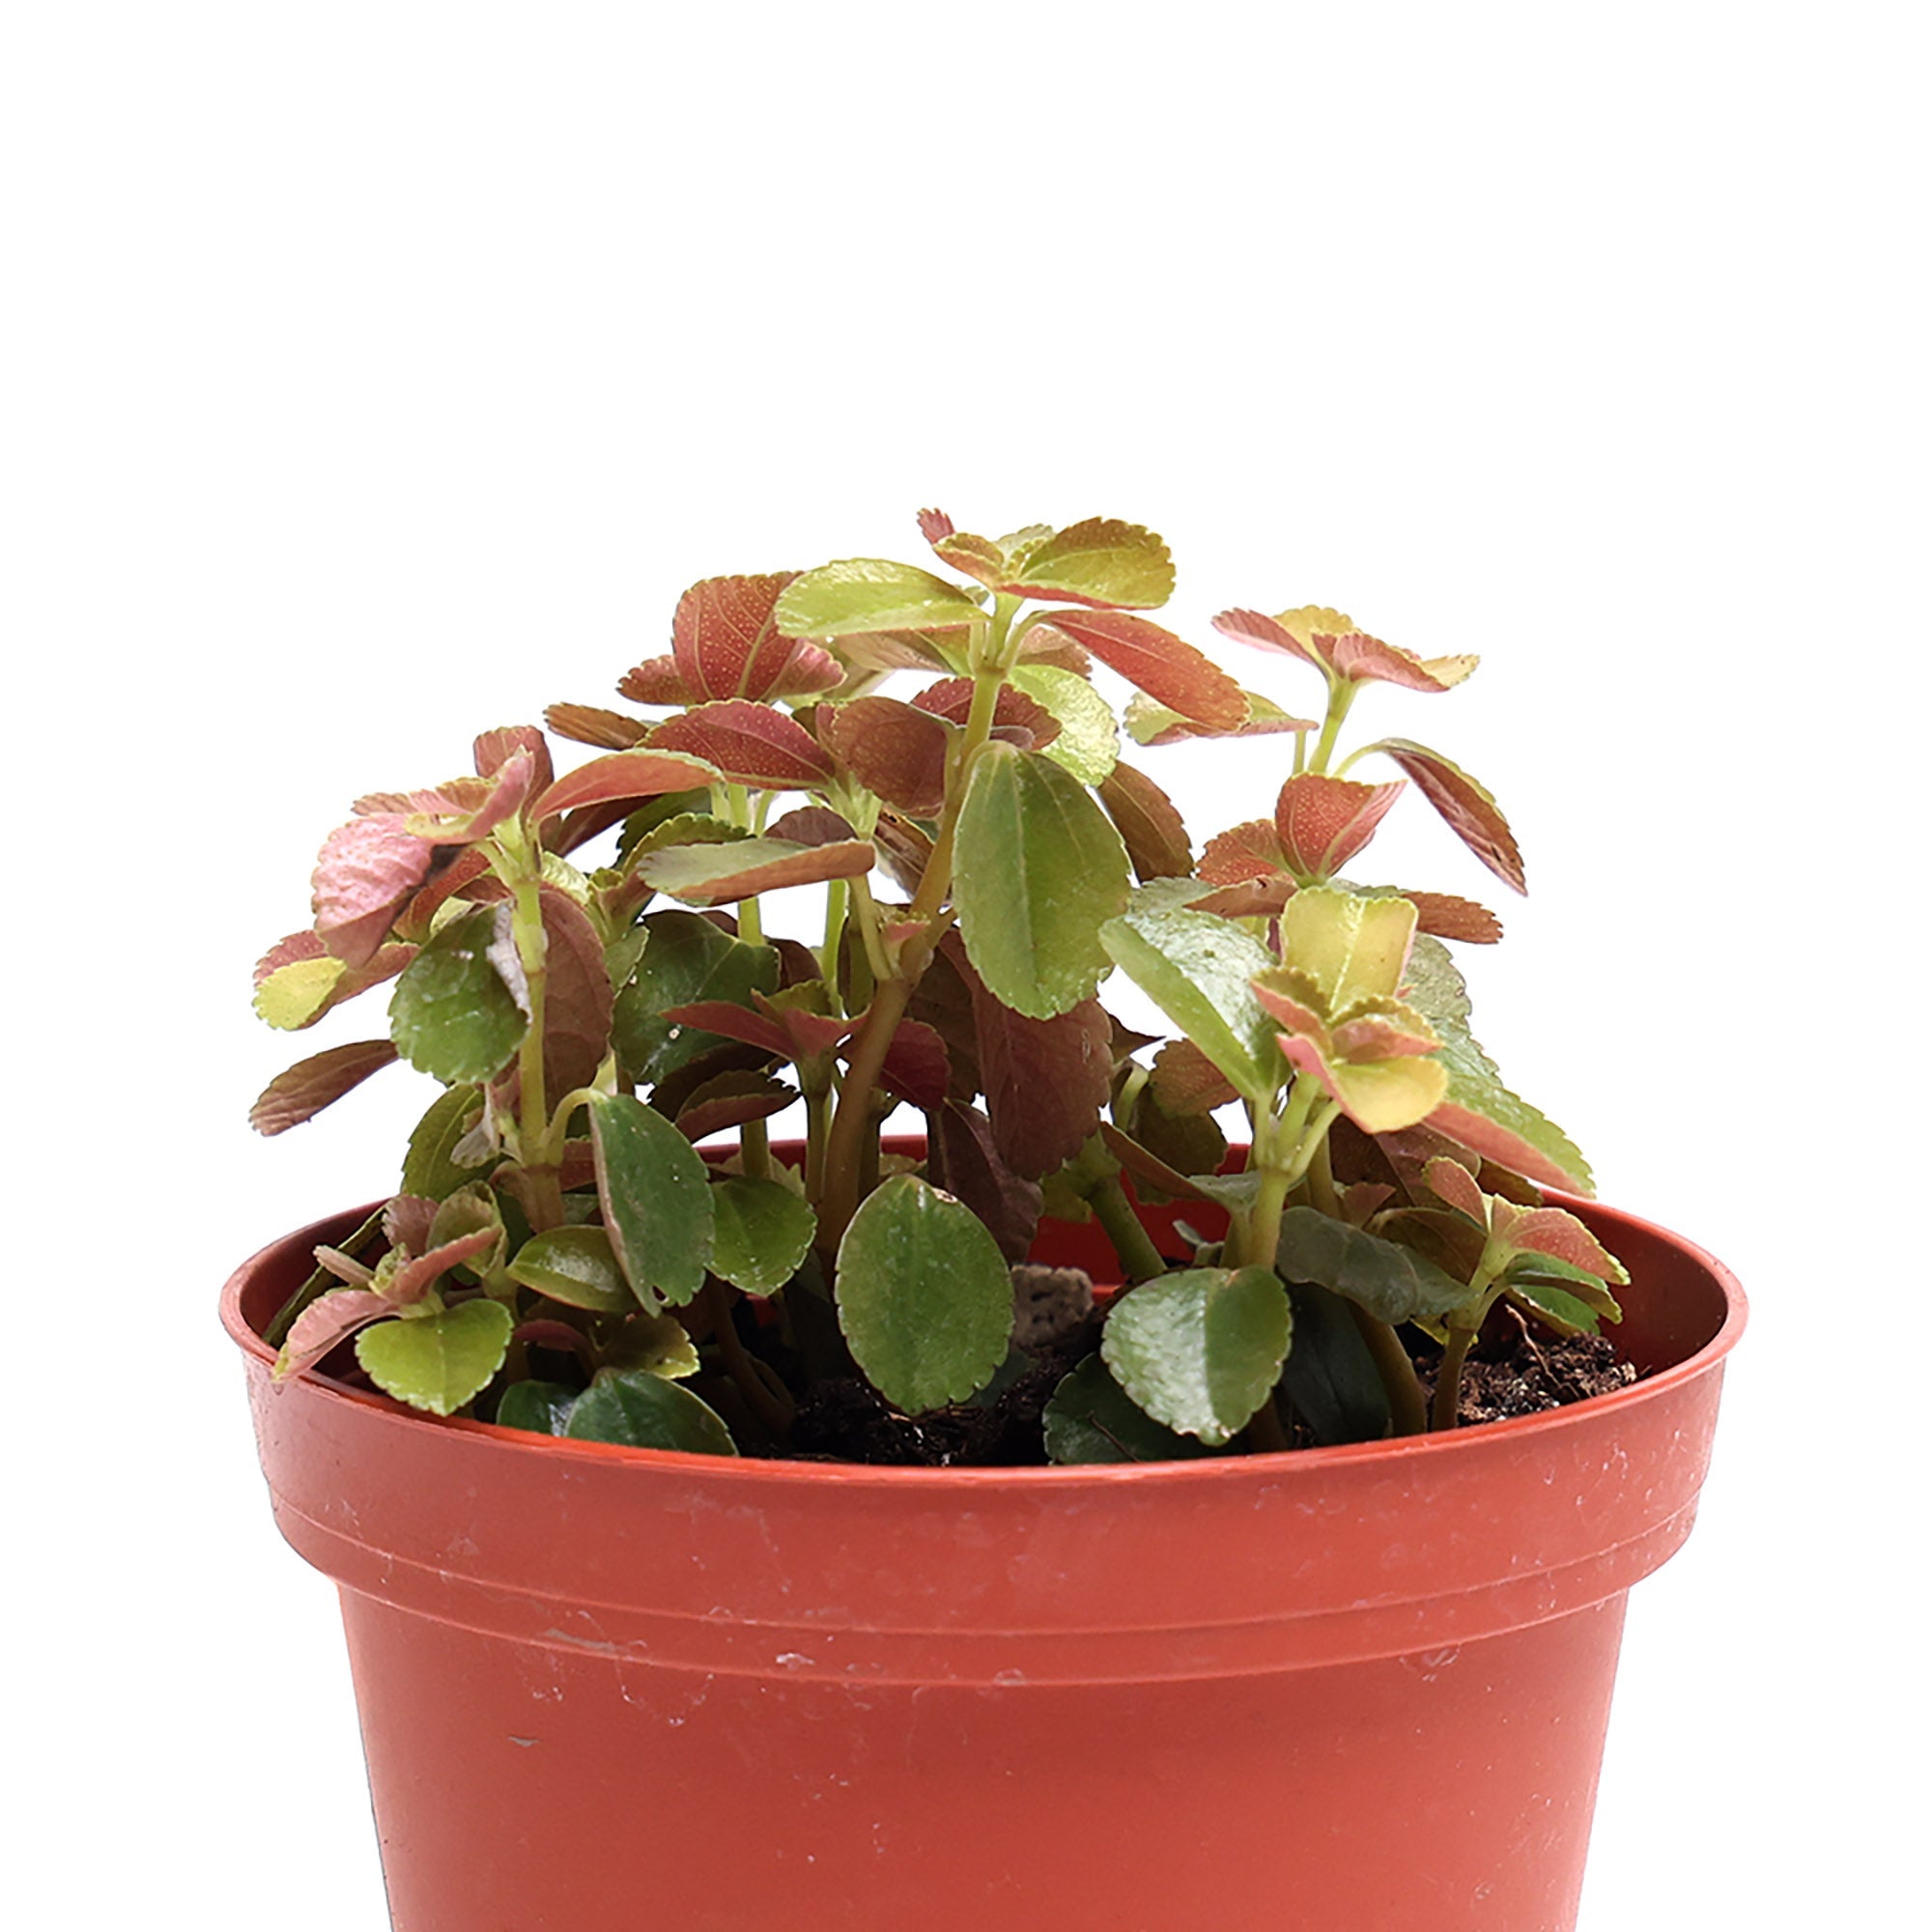 A small Pilea Depressa 4 Inches plant with lush green and red leaves in a terracotta pot, isolated on a white background from Chive Studio.